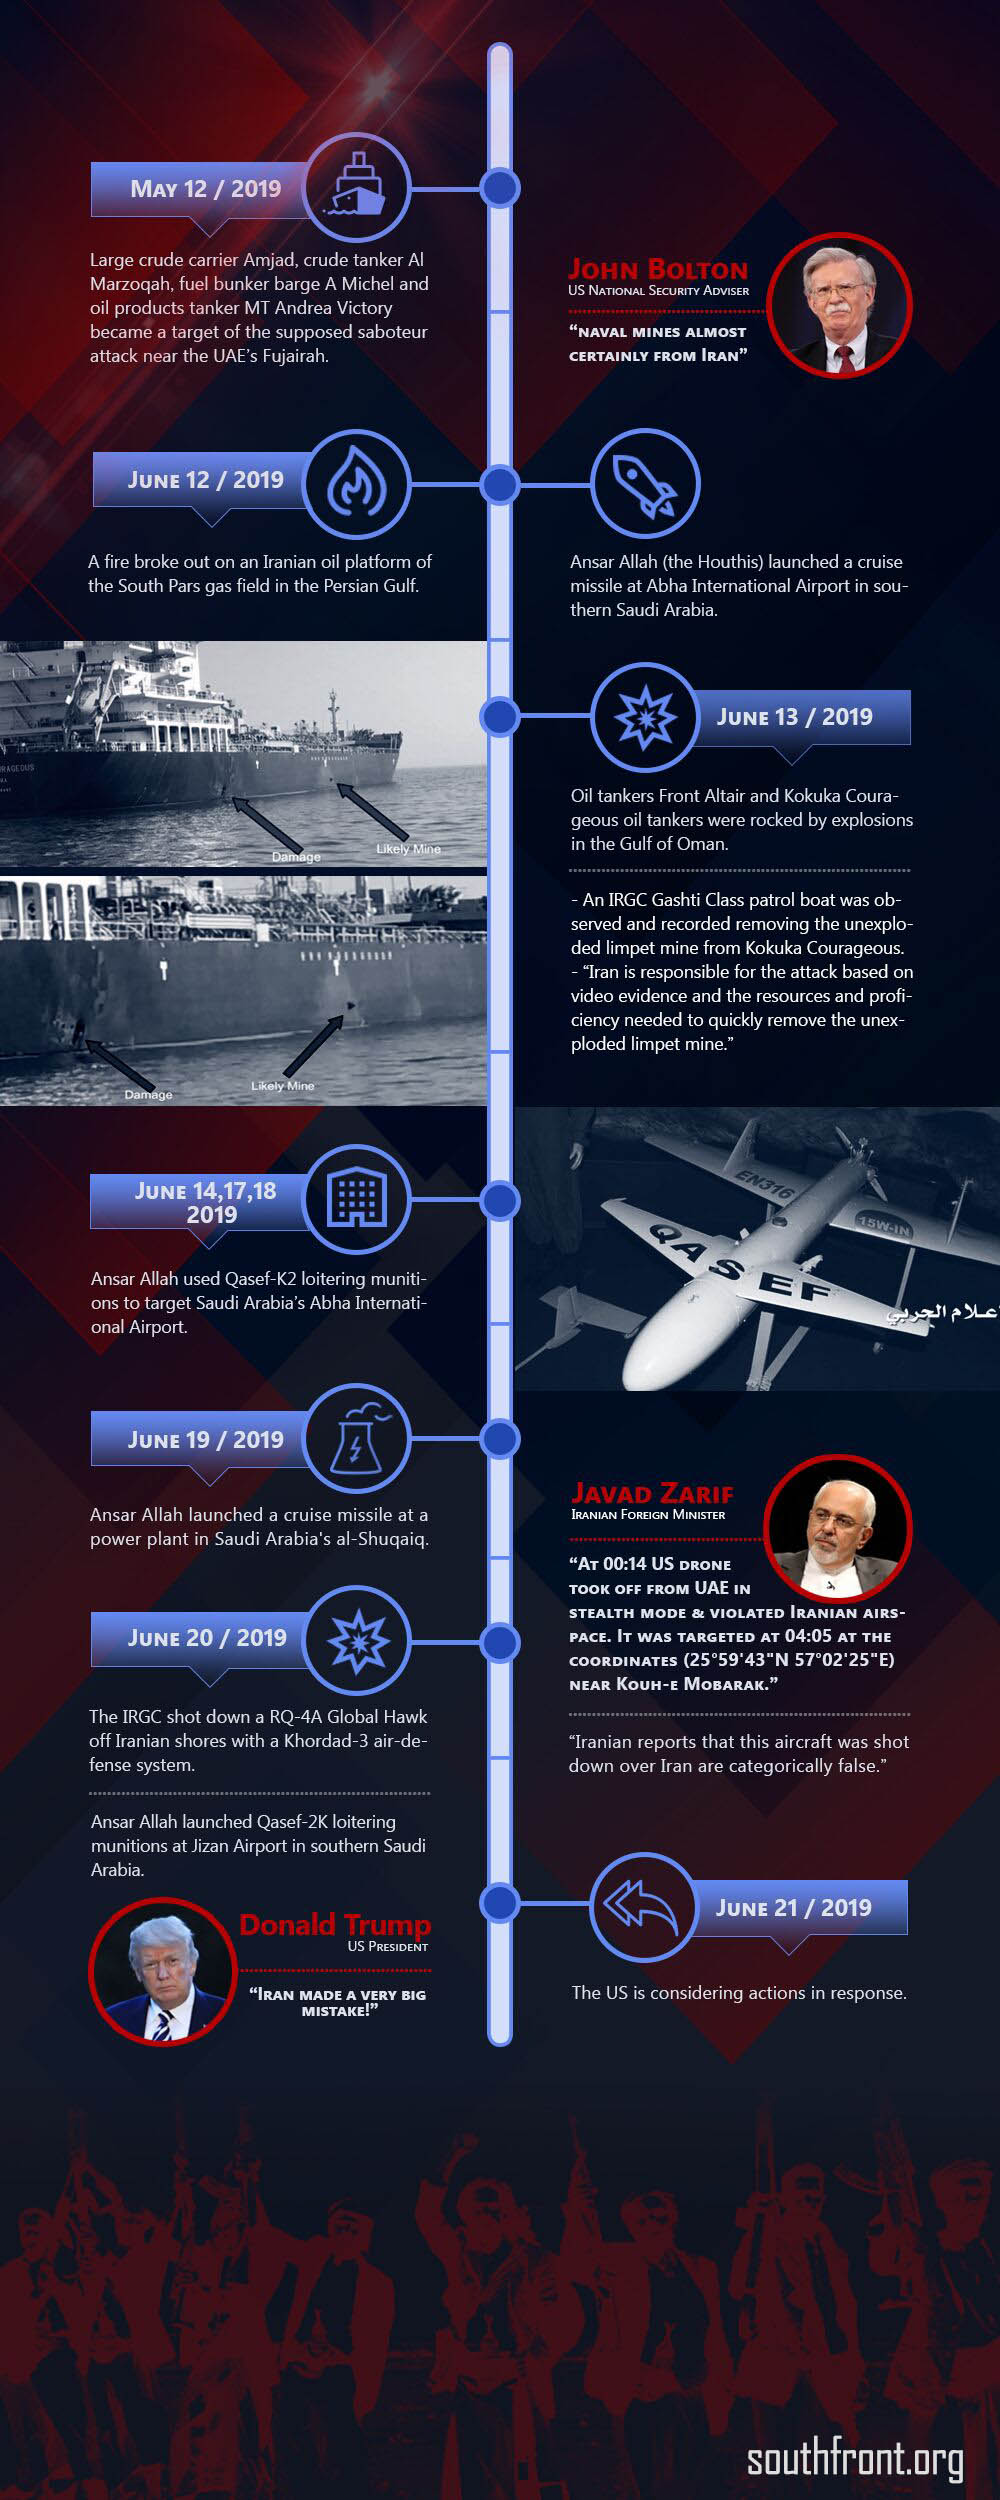 Timeline Of Escalation In Persian Gulf Region (Infographics)